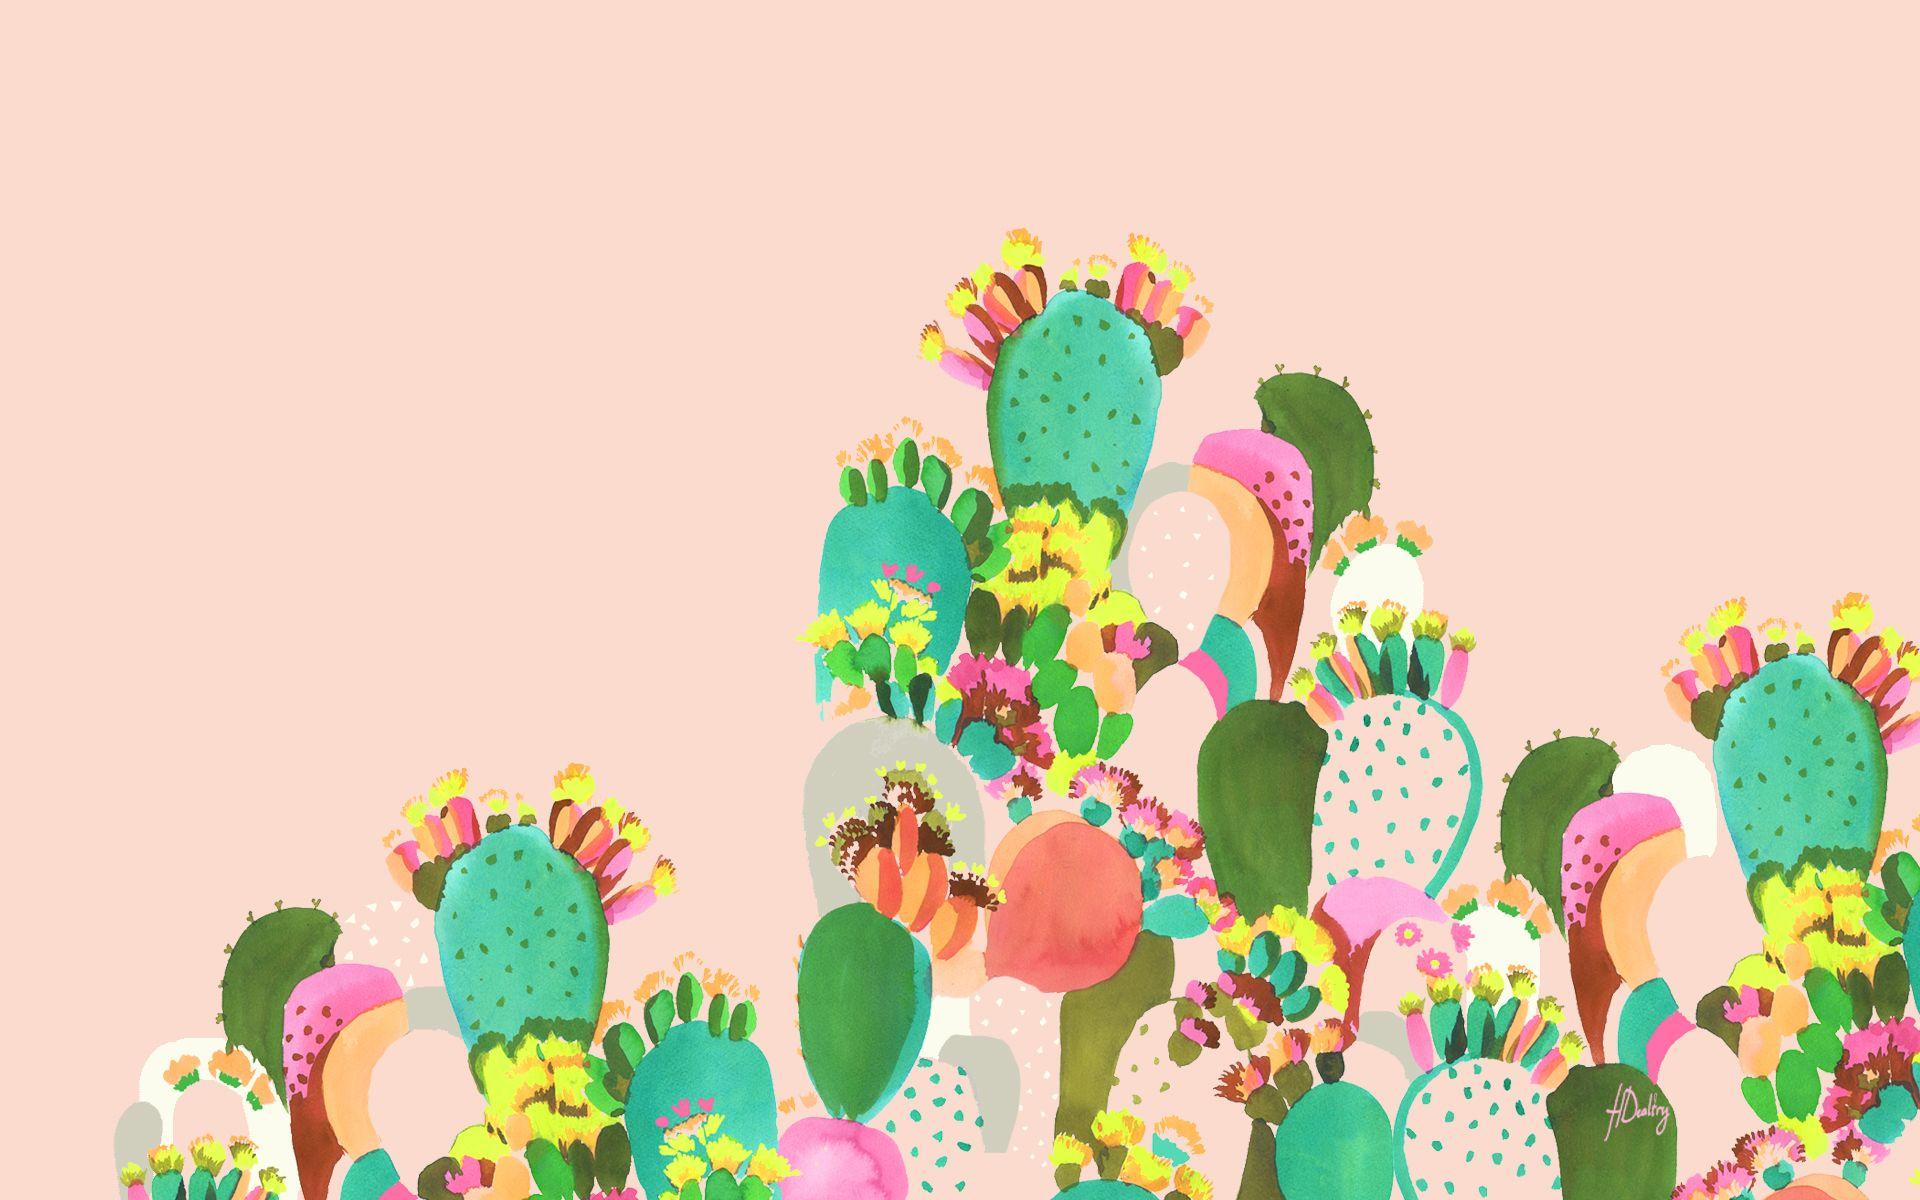 Cactus by Helen Dealtry. DIY Crafts <3. Cacti